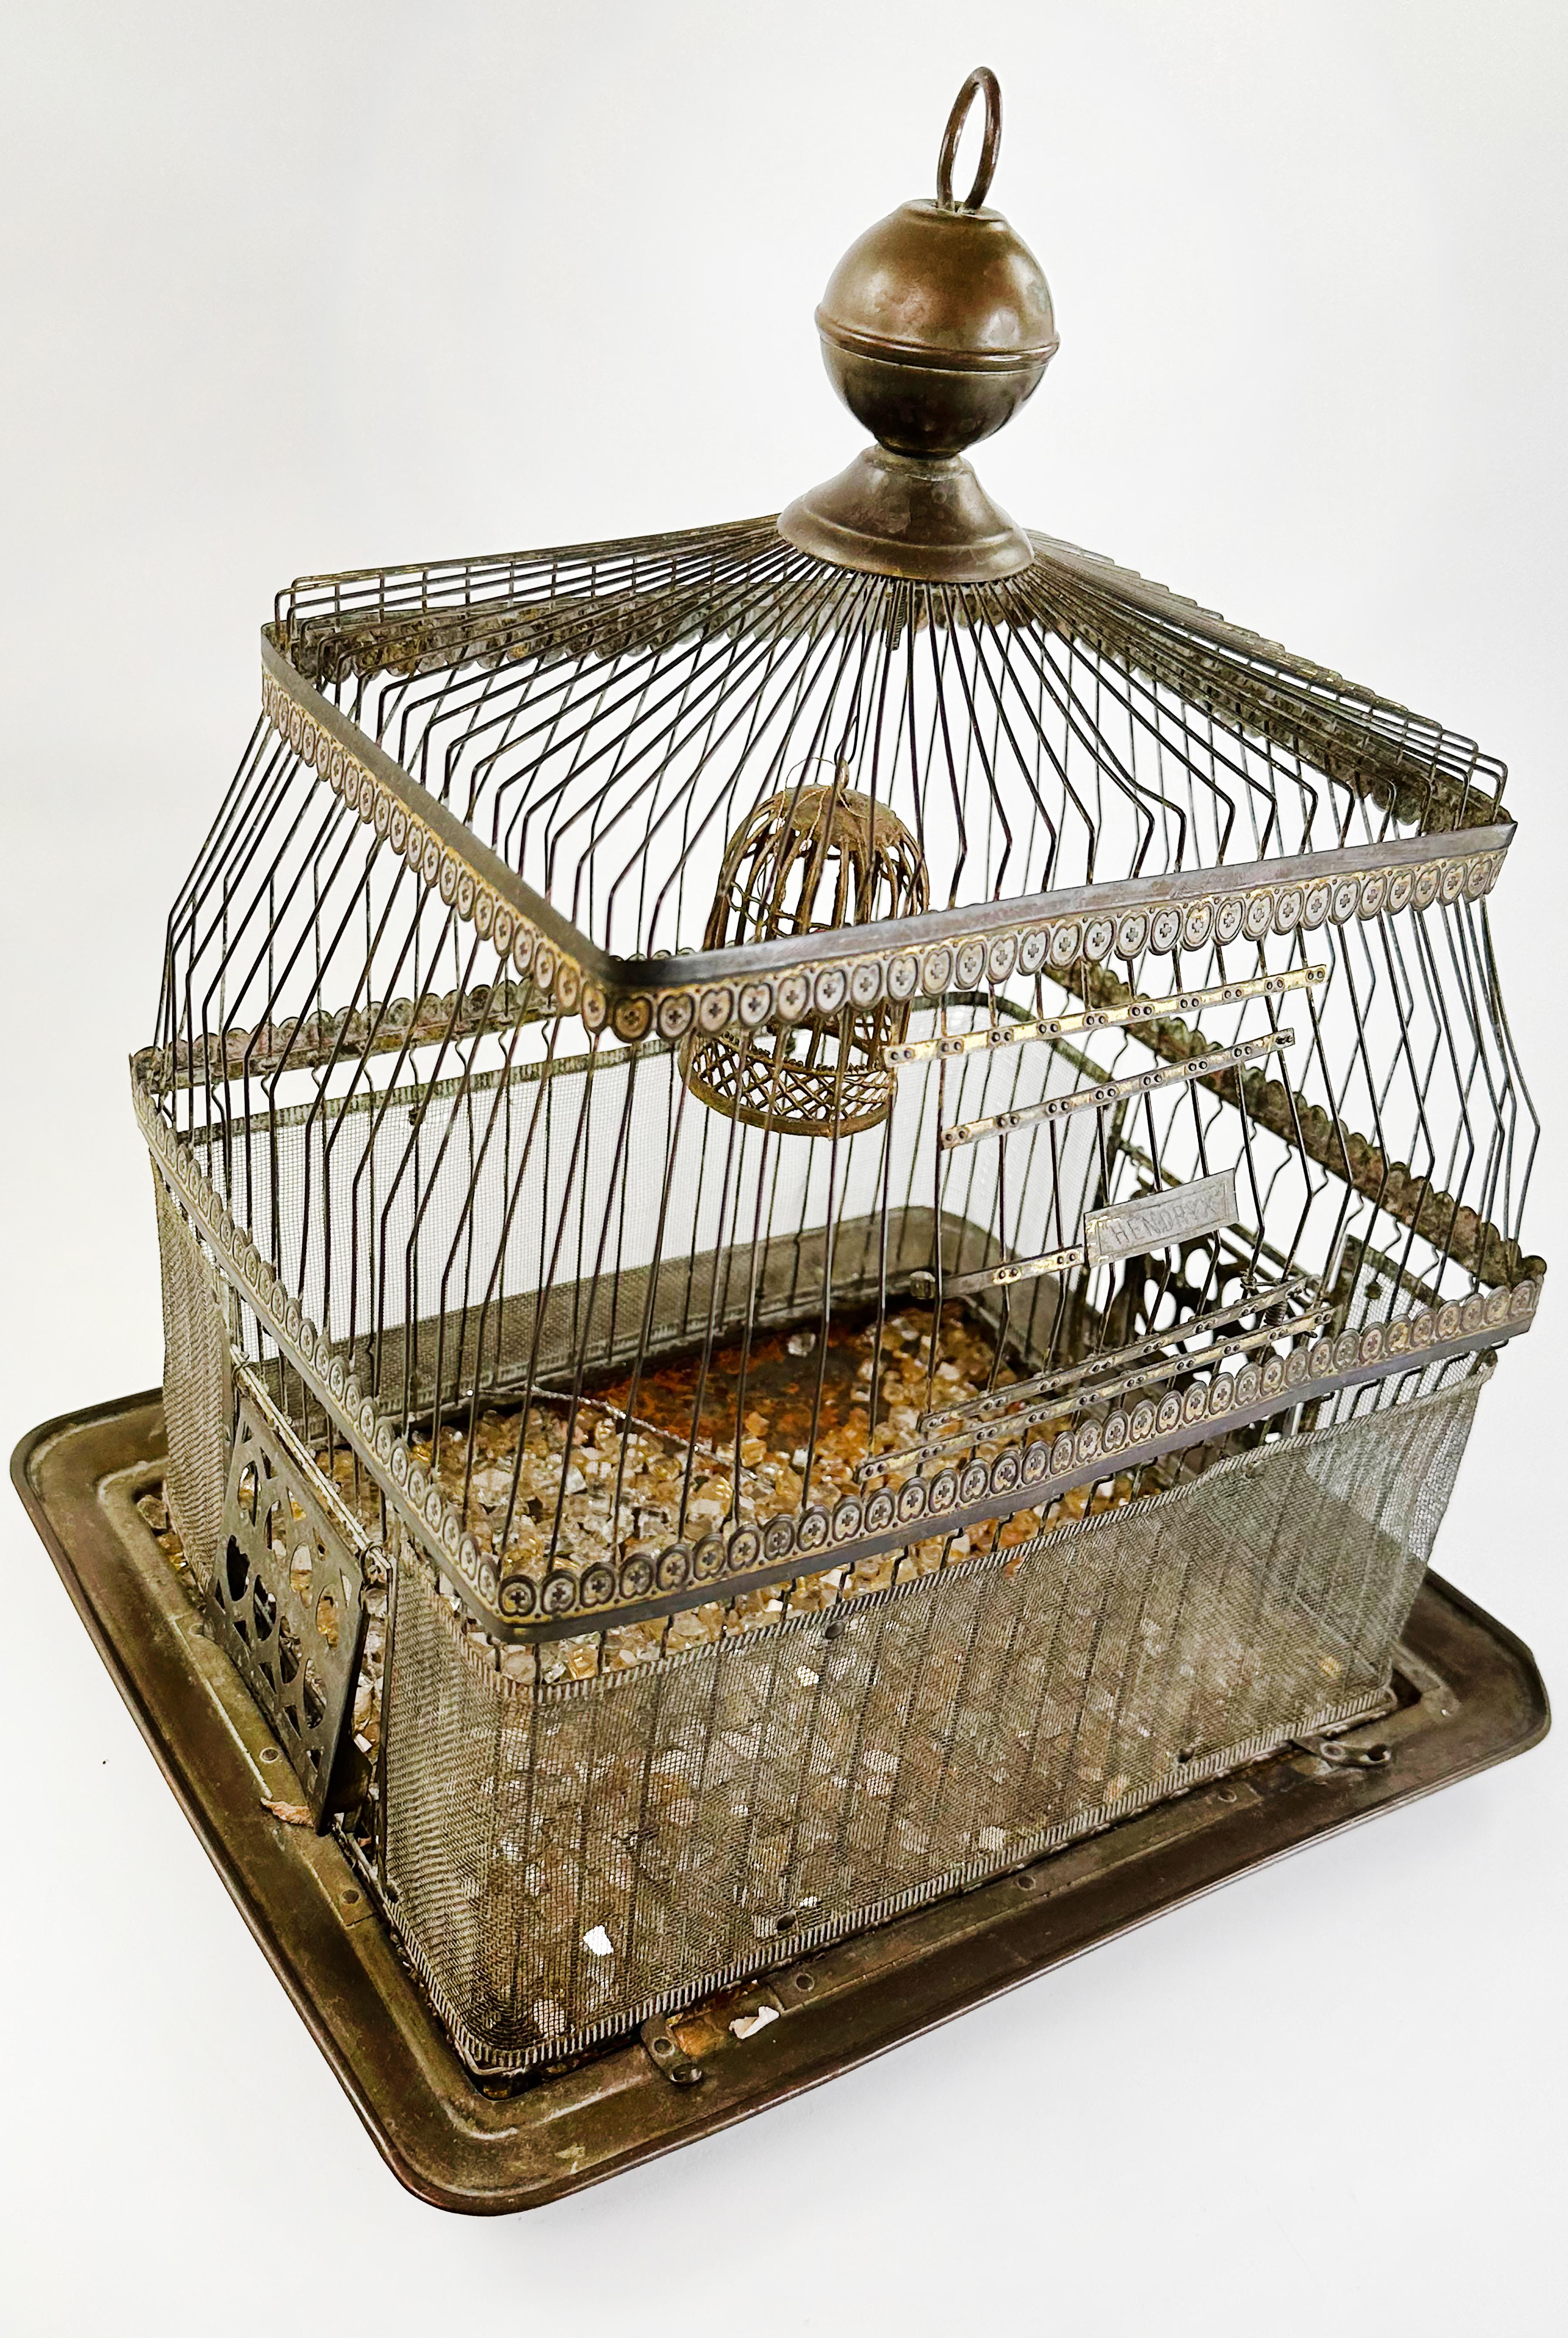 An elegantly crafted and charming vintage birdcage. Made with brass and steel wire. 

The top of this piece has an intricately cut light green leaf design. The bottom is adorned with small chunks of glass. A miniature bird cage stands in the top